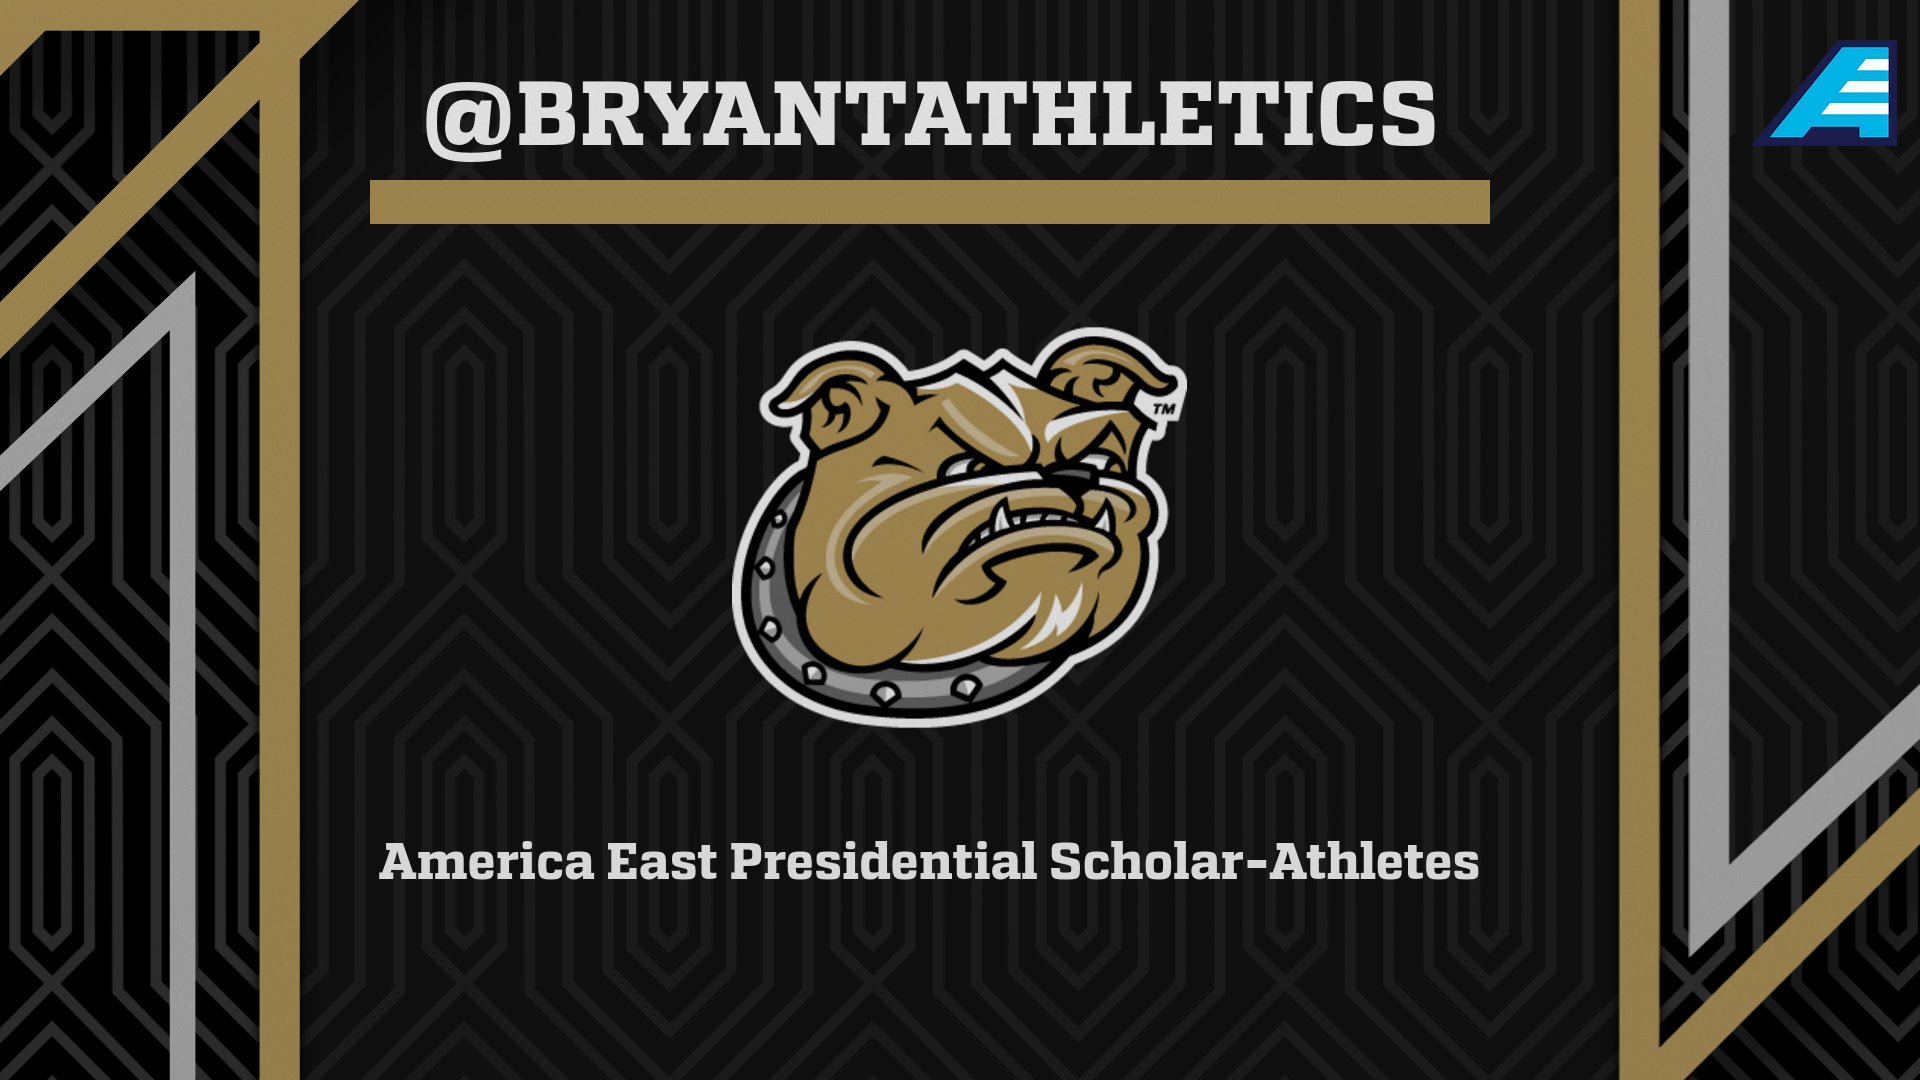 18 Student-Athletes named America East Presidential Scholar-Athletes